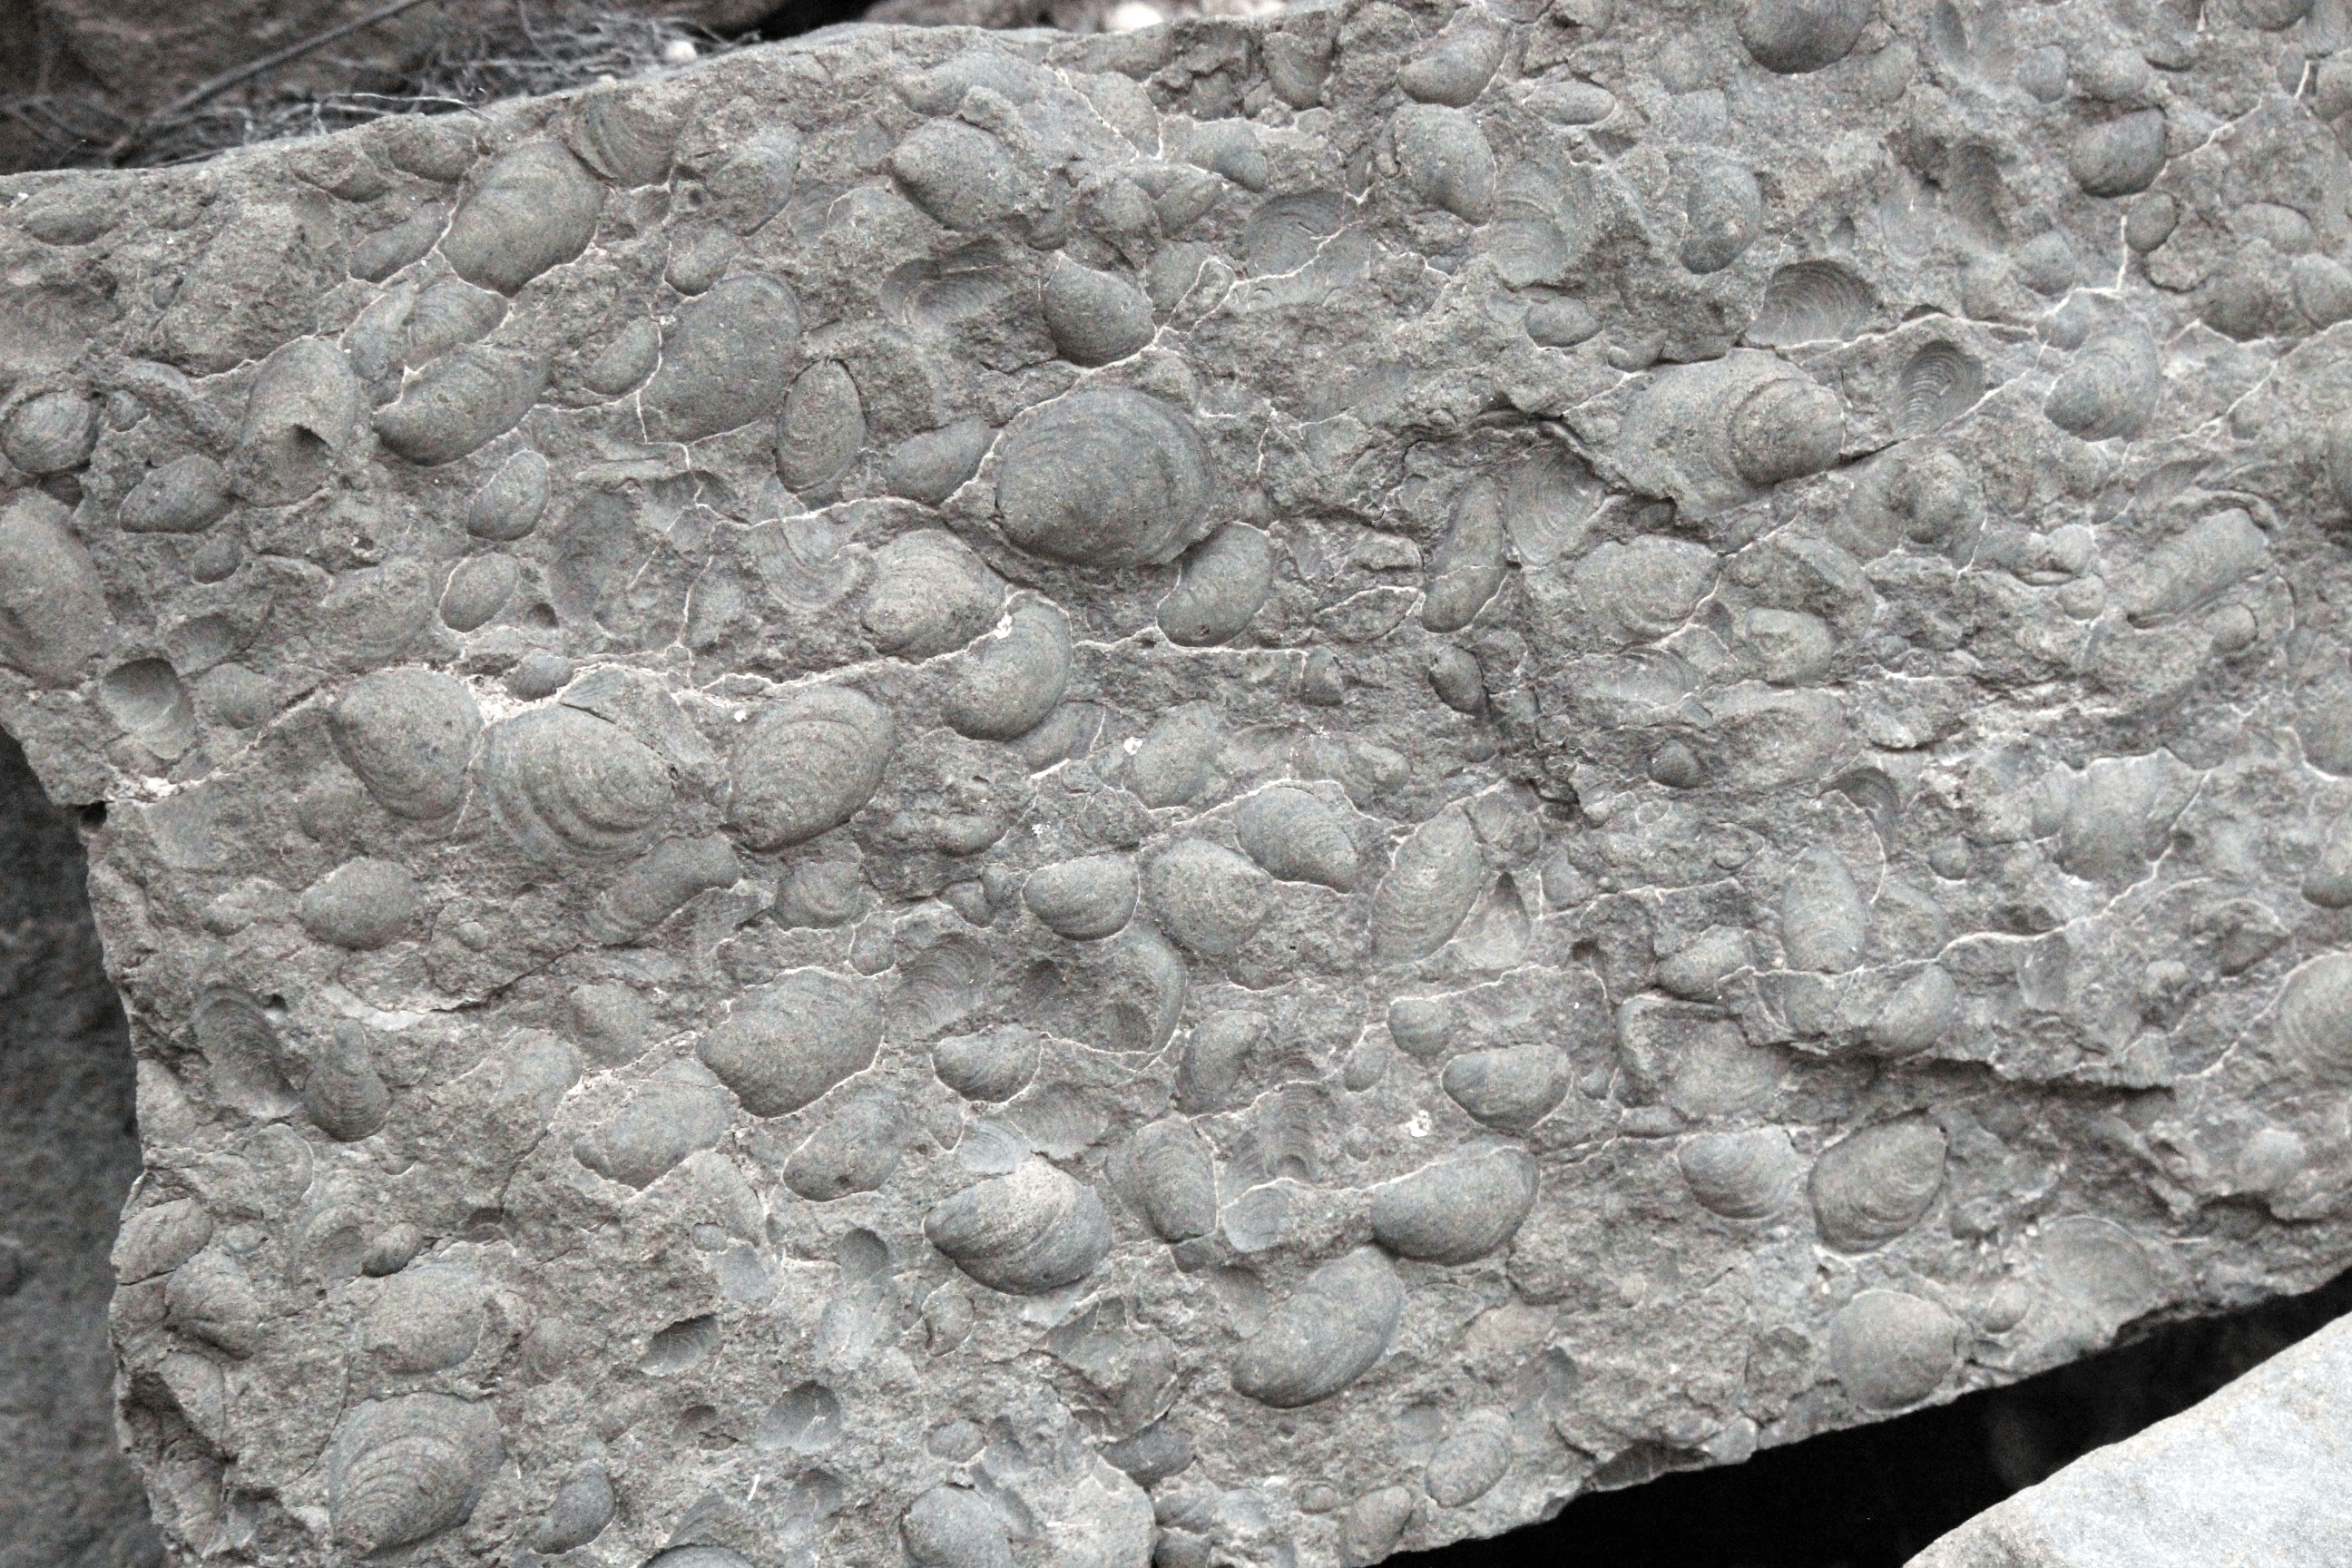 many shell like fossils in a rock